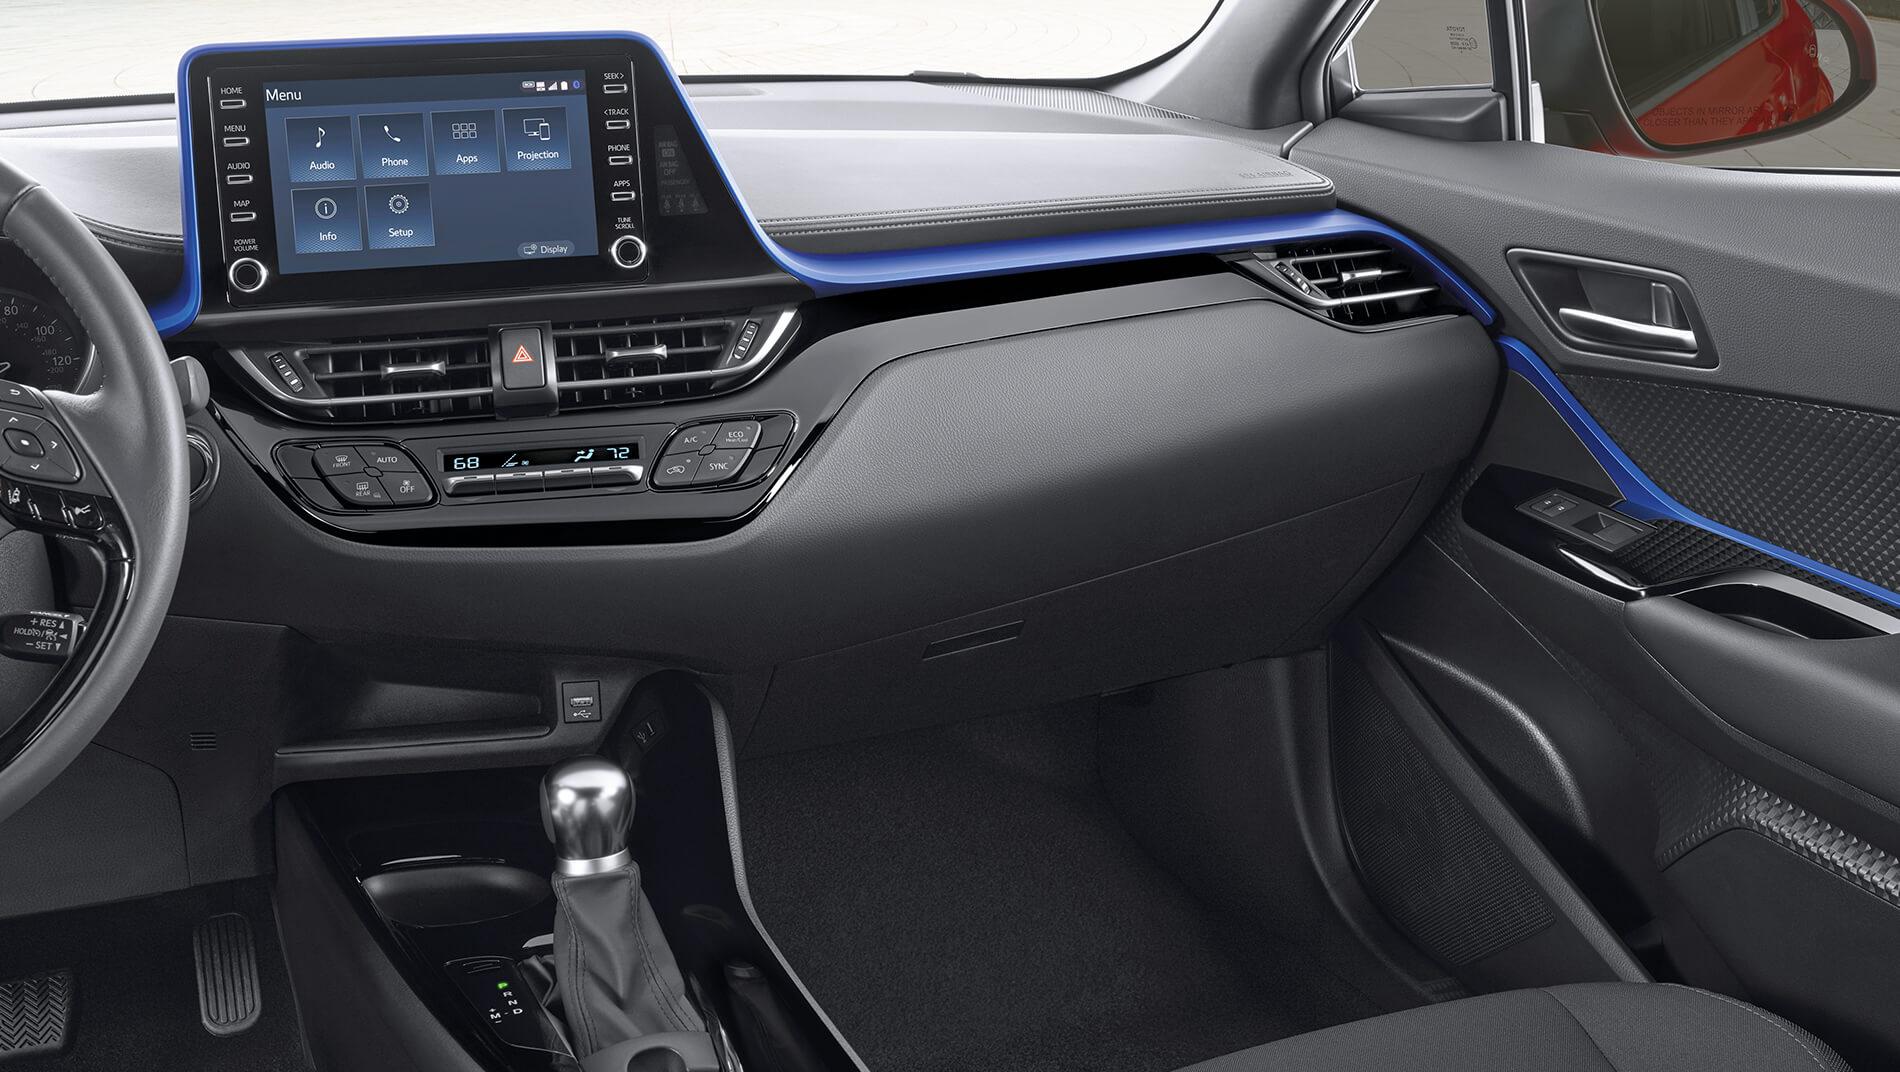 inside of a Toyota C-HR with grey interior and blue trim showing touchscreen